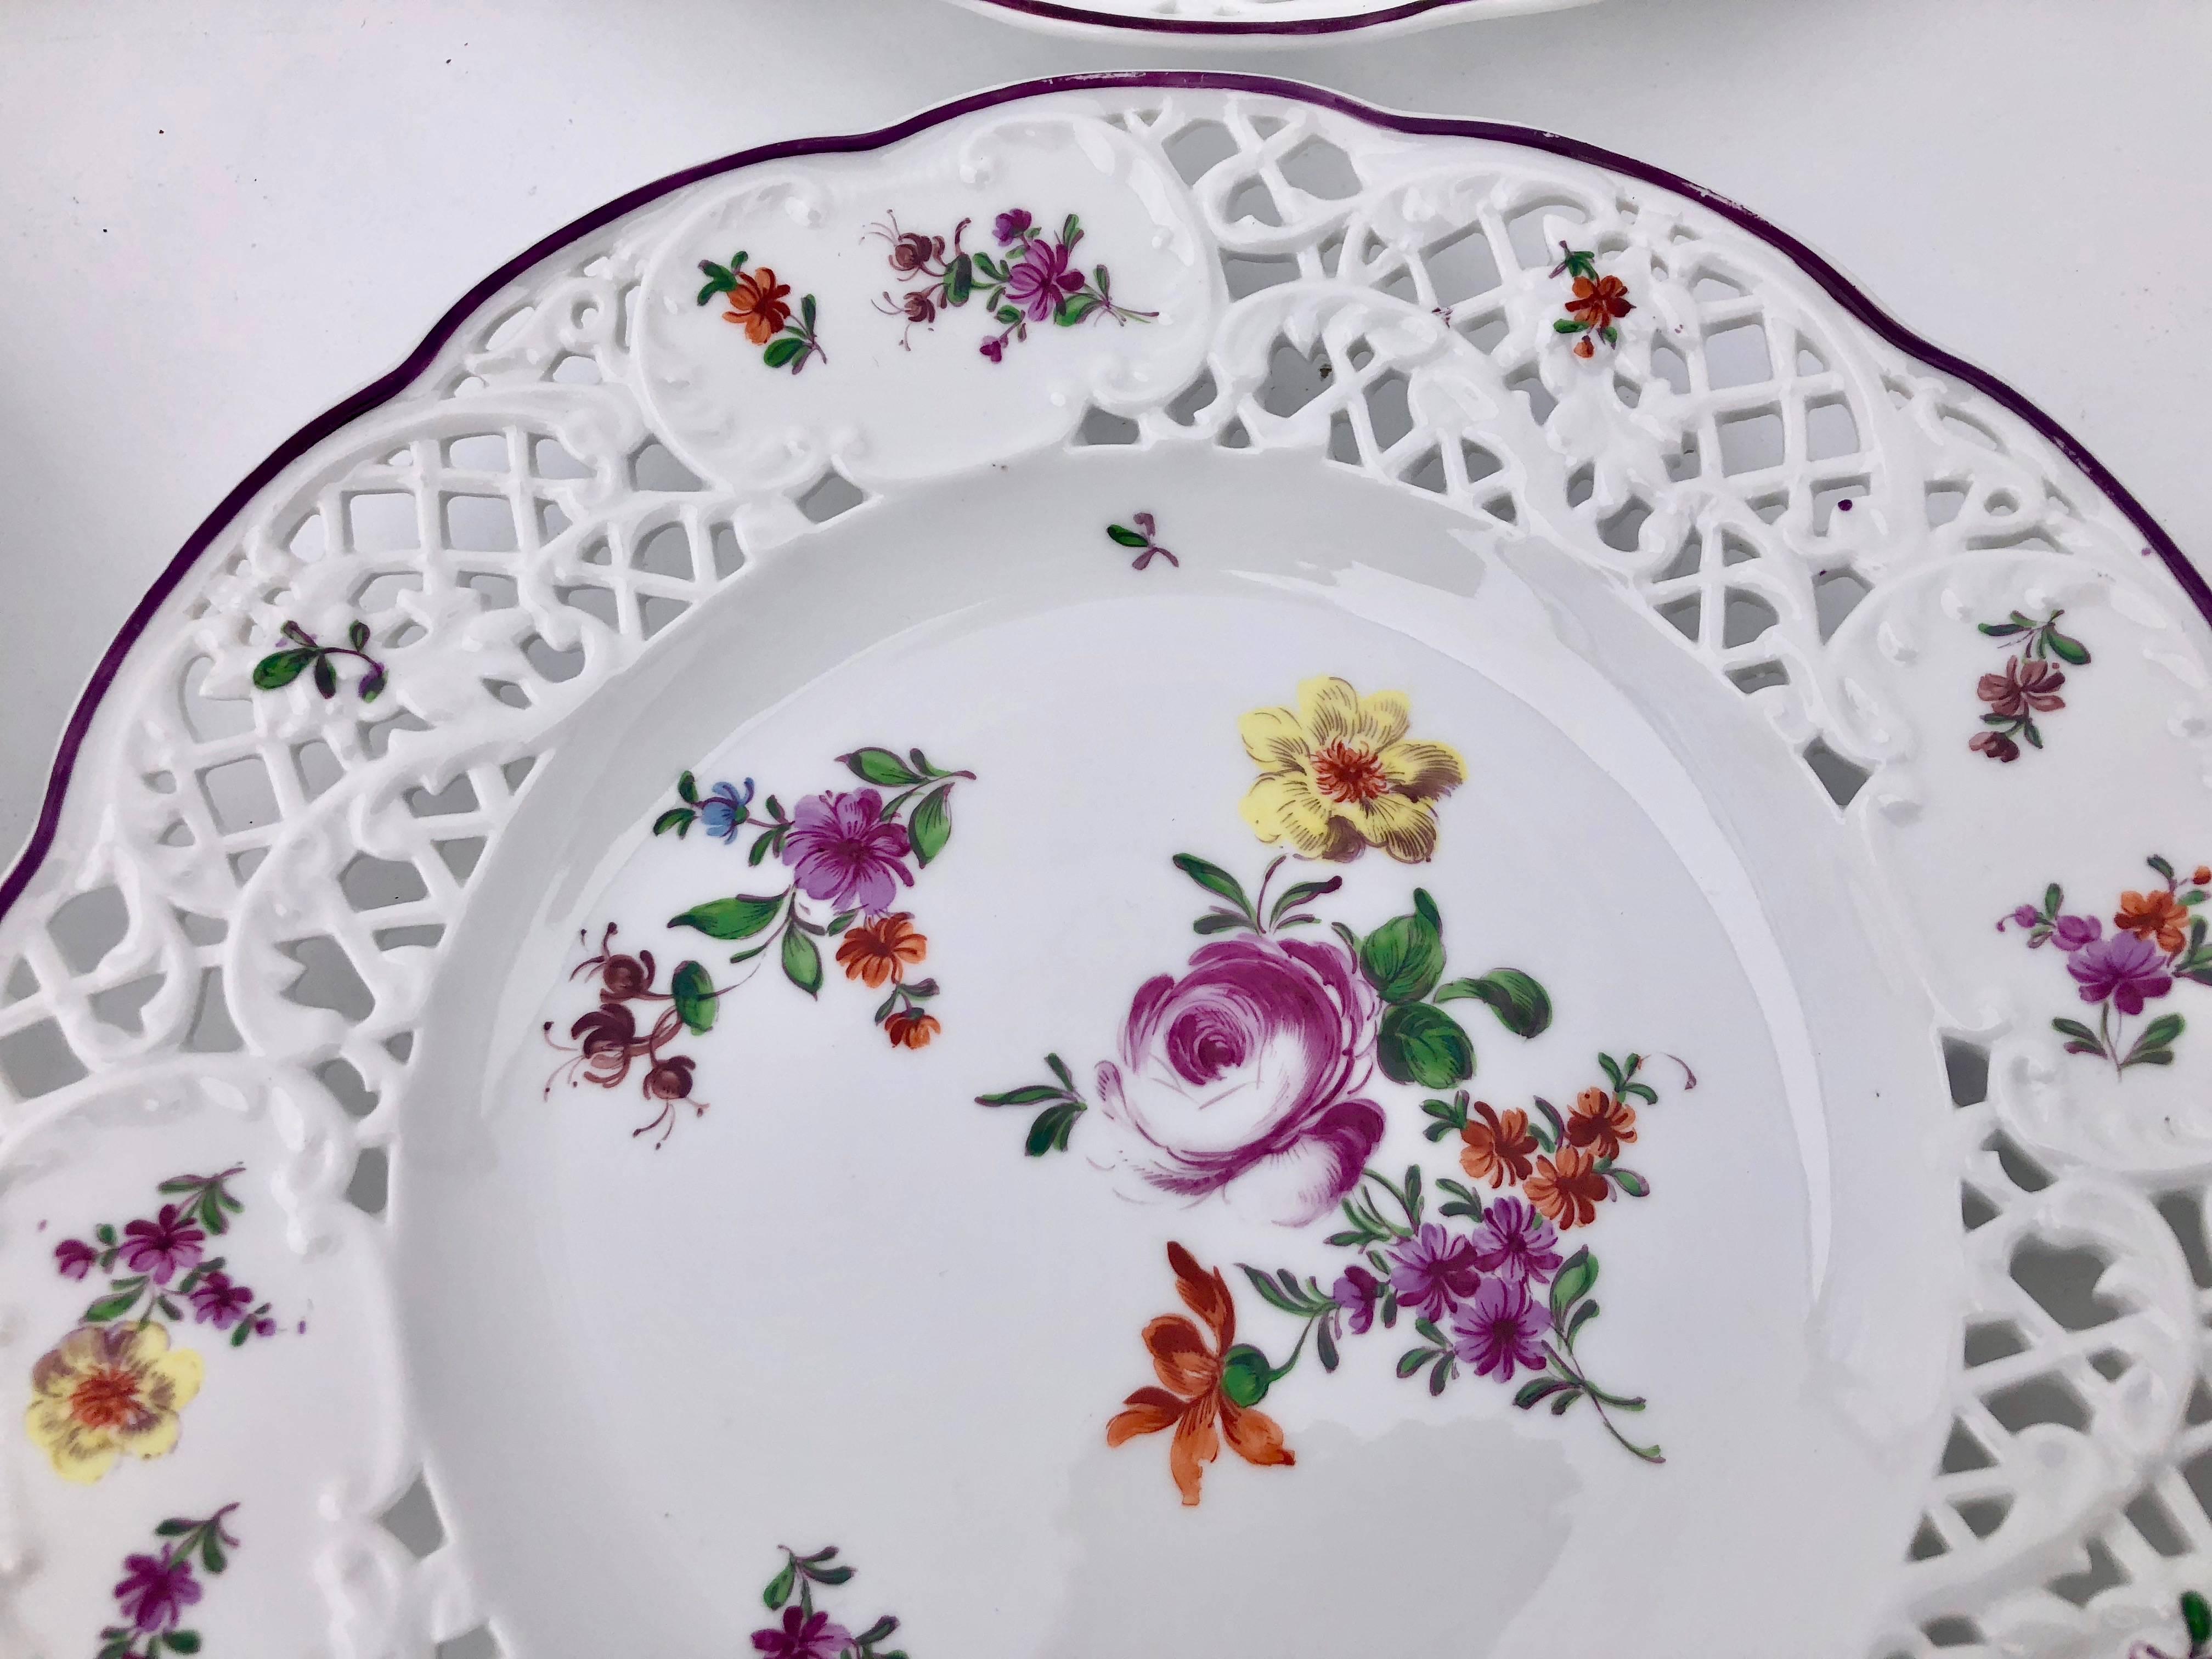 24 Meissen Plates with Reticulated Borders and Floral Decoration, Early 1900s im Angebot 4